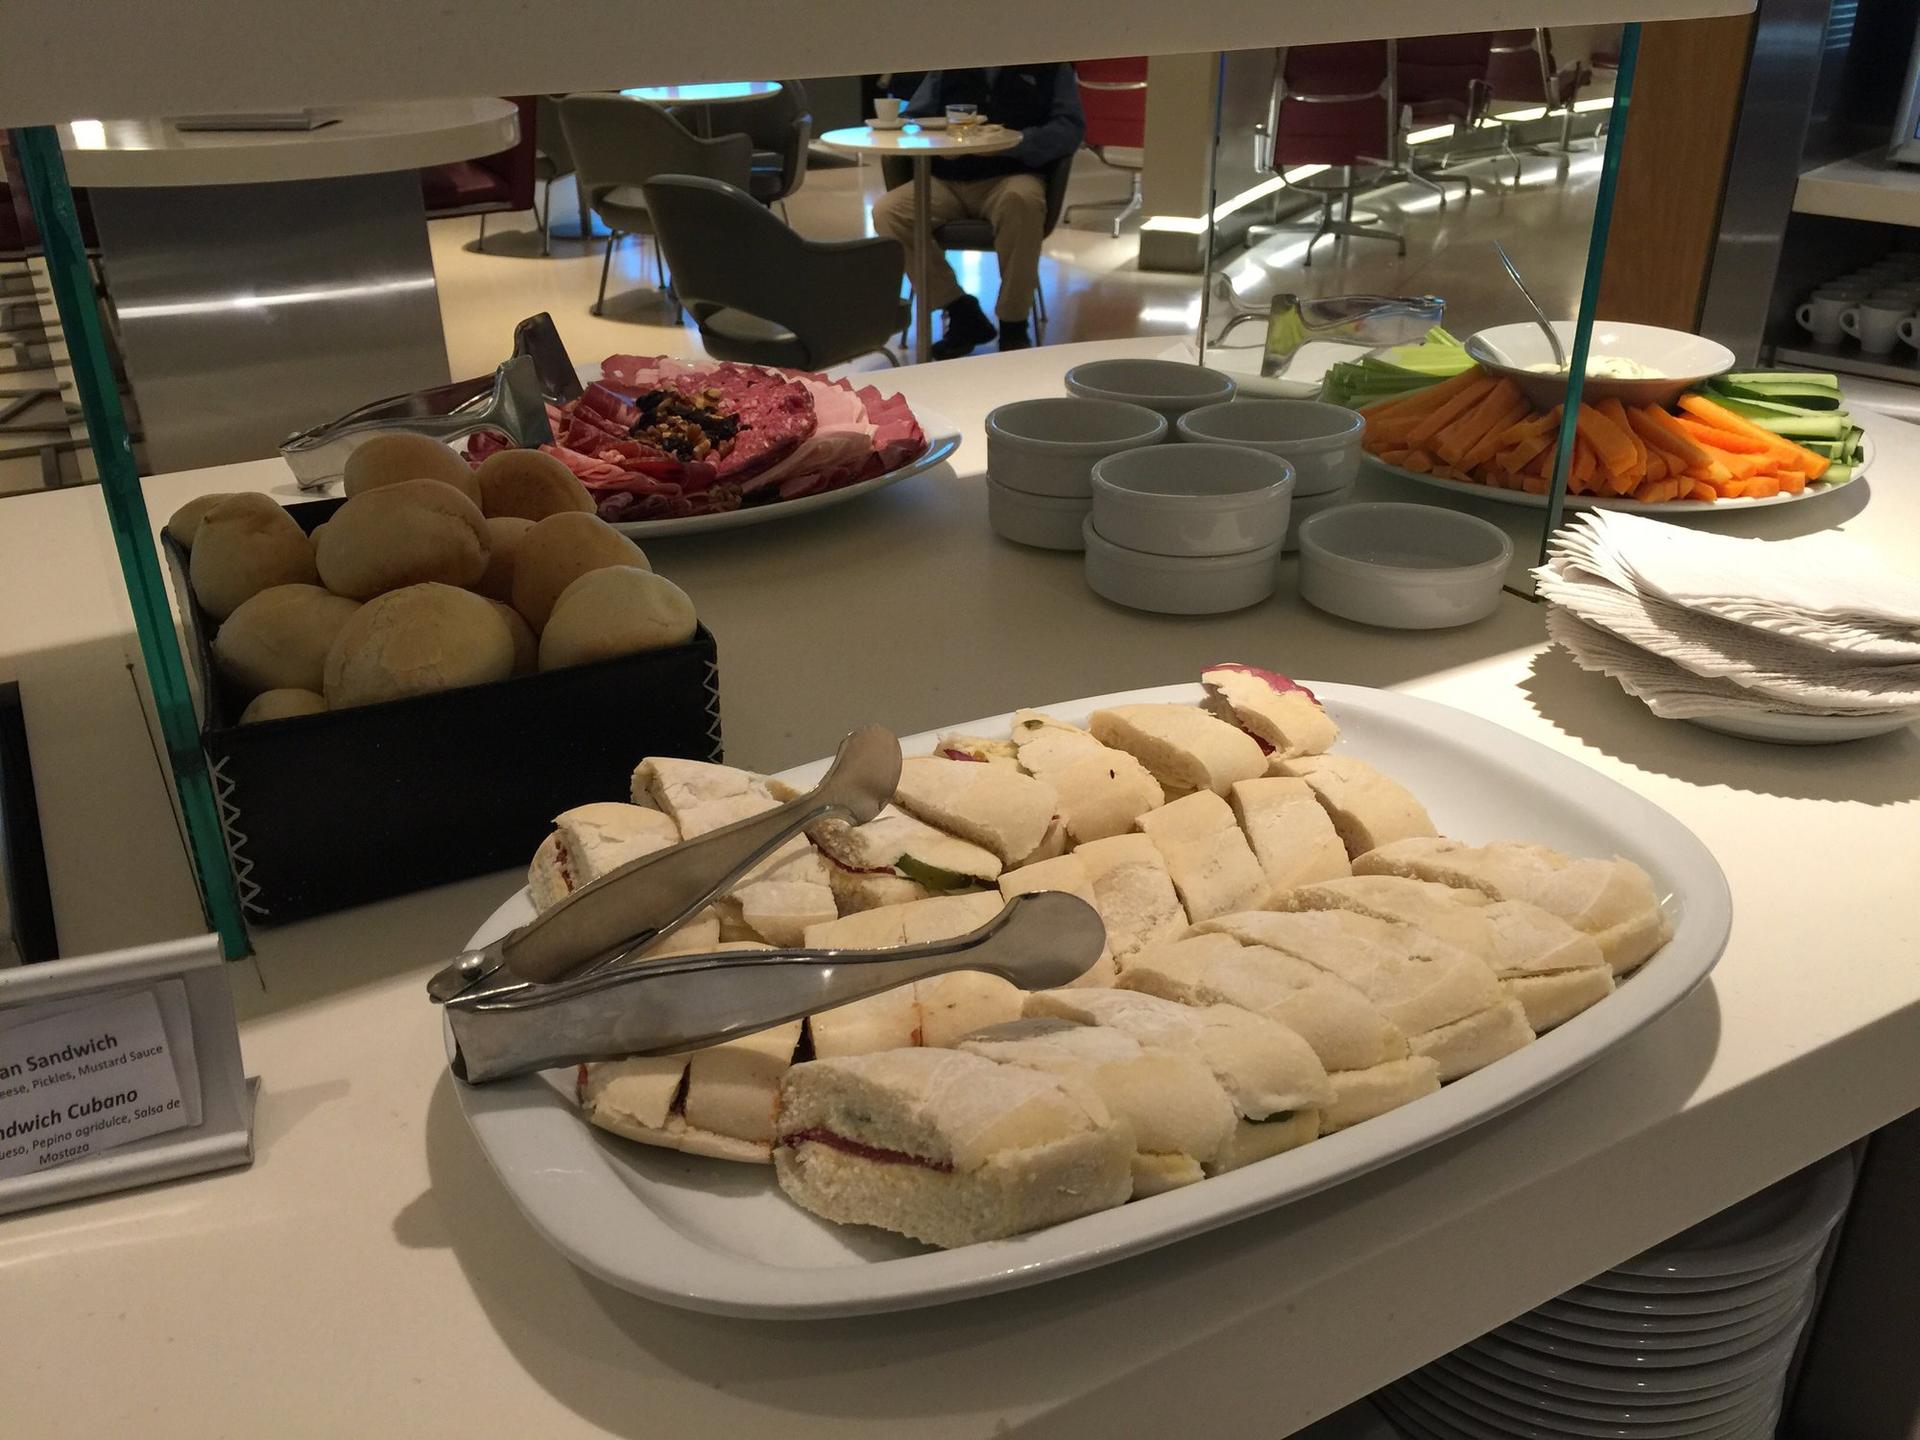 American Airlines Admirals Club & Iberia VIP Lounge image 3 of 18